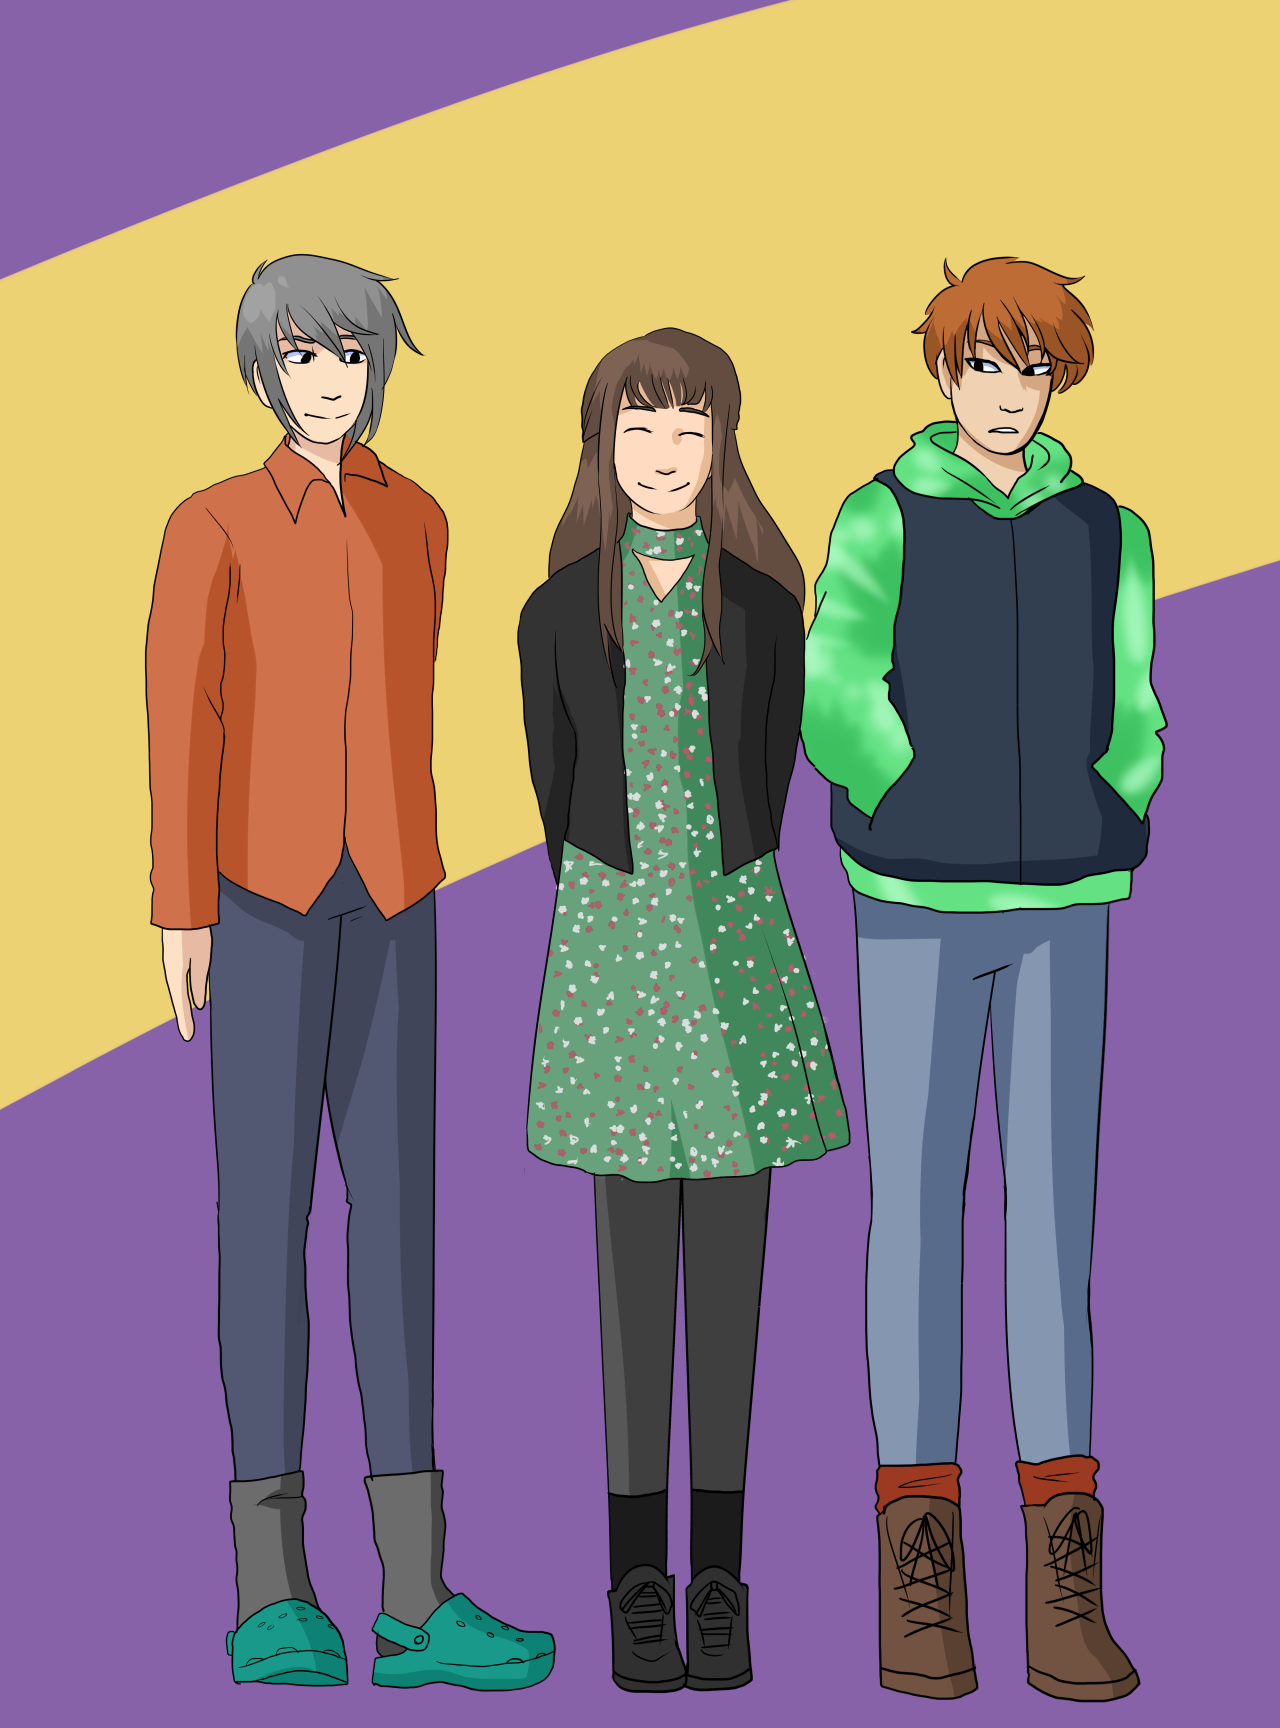 The fruits basket kids drawn in clothes I own challenge no one asked for! Feat. Yuki in crocs 